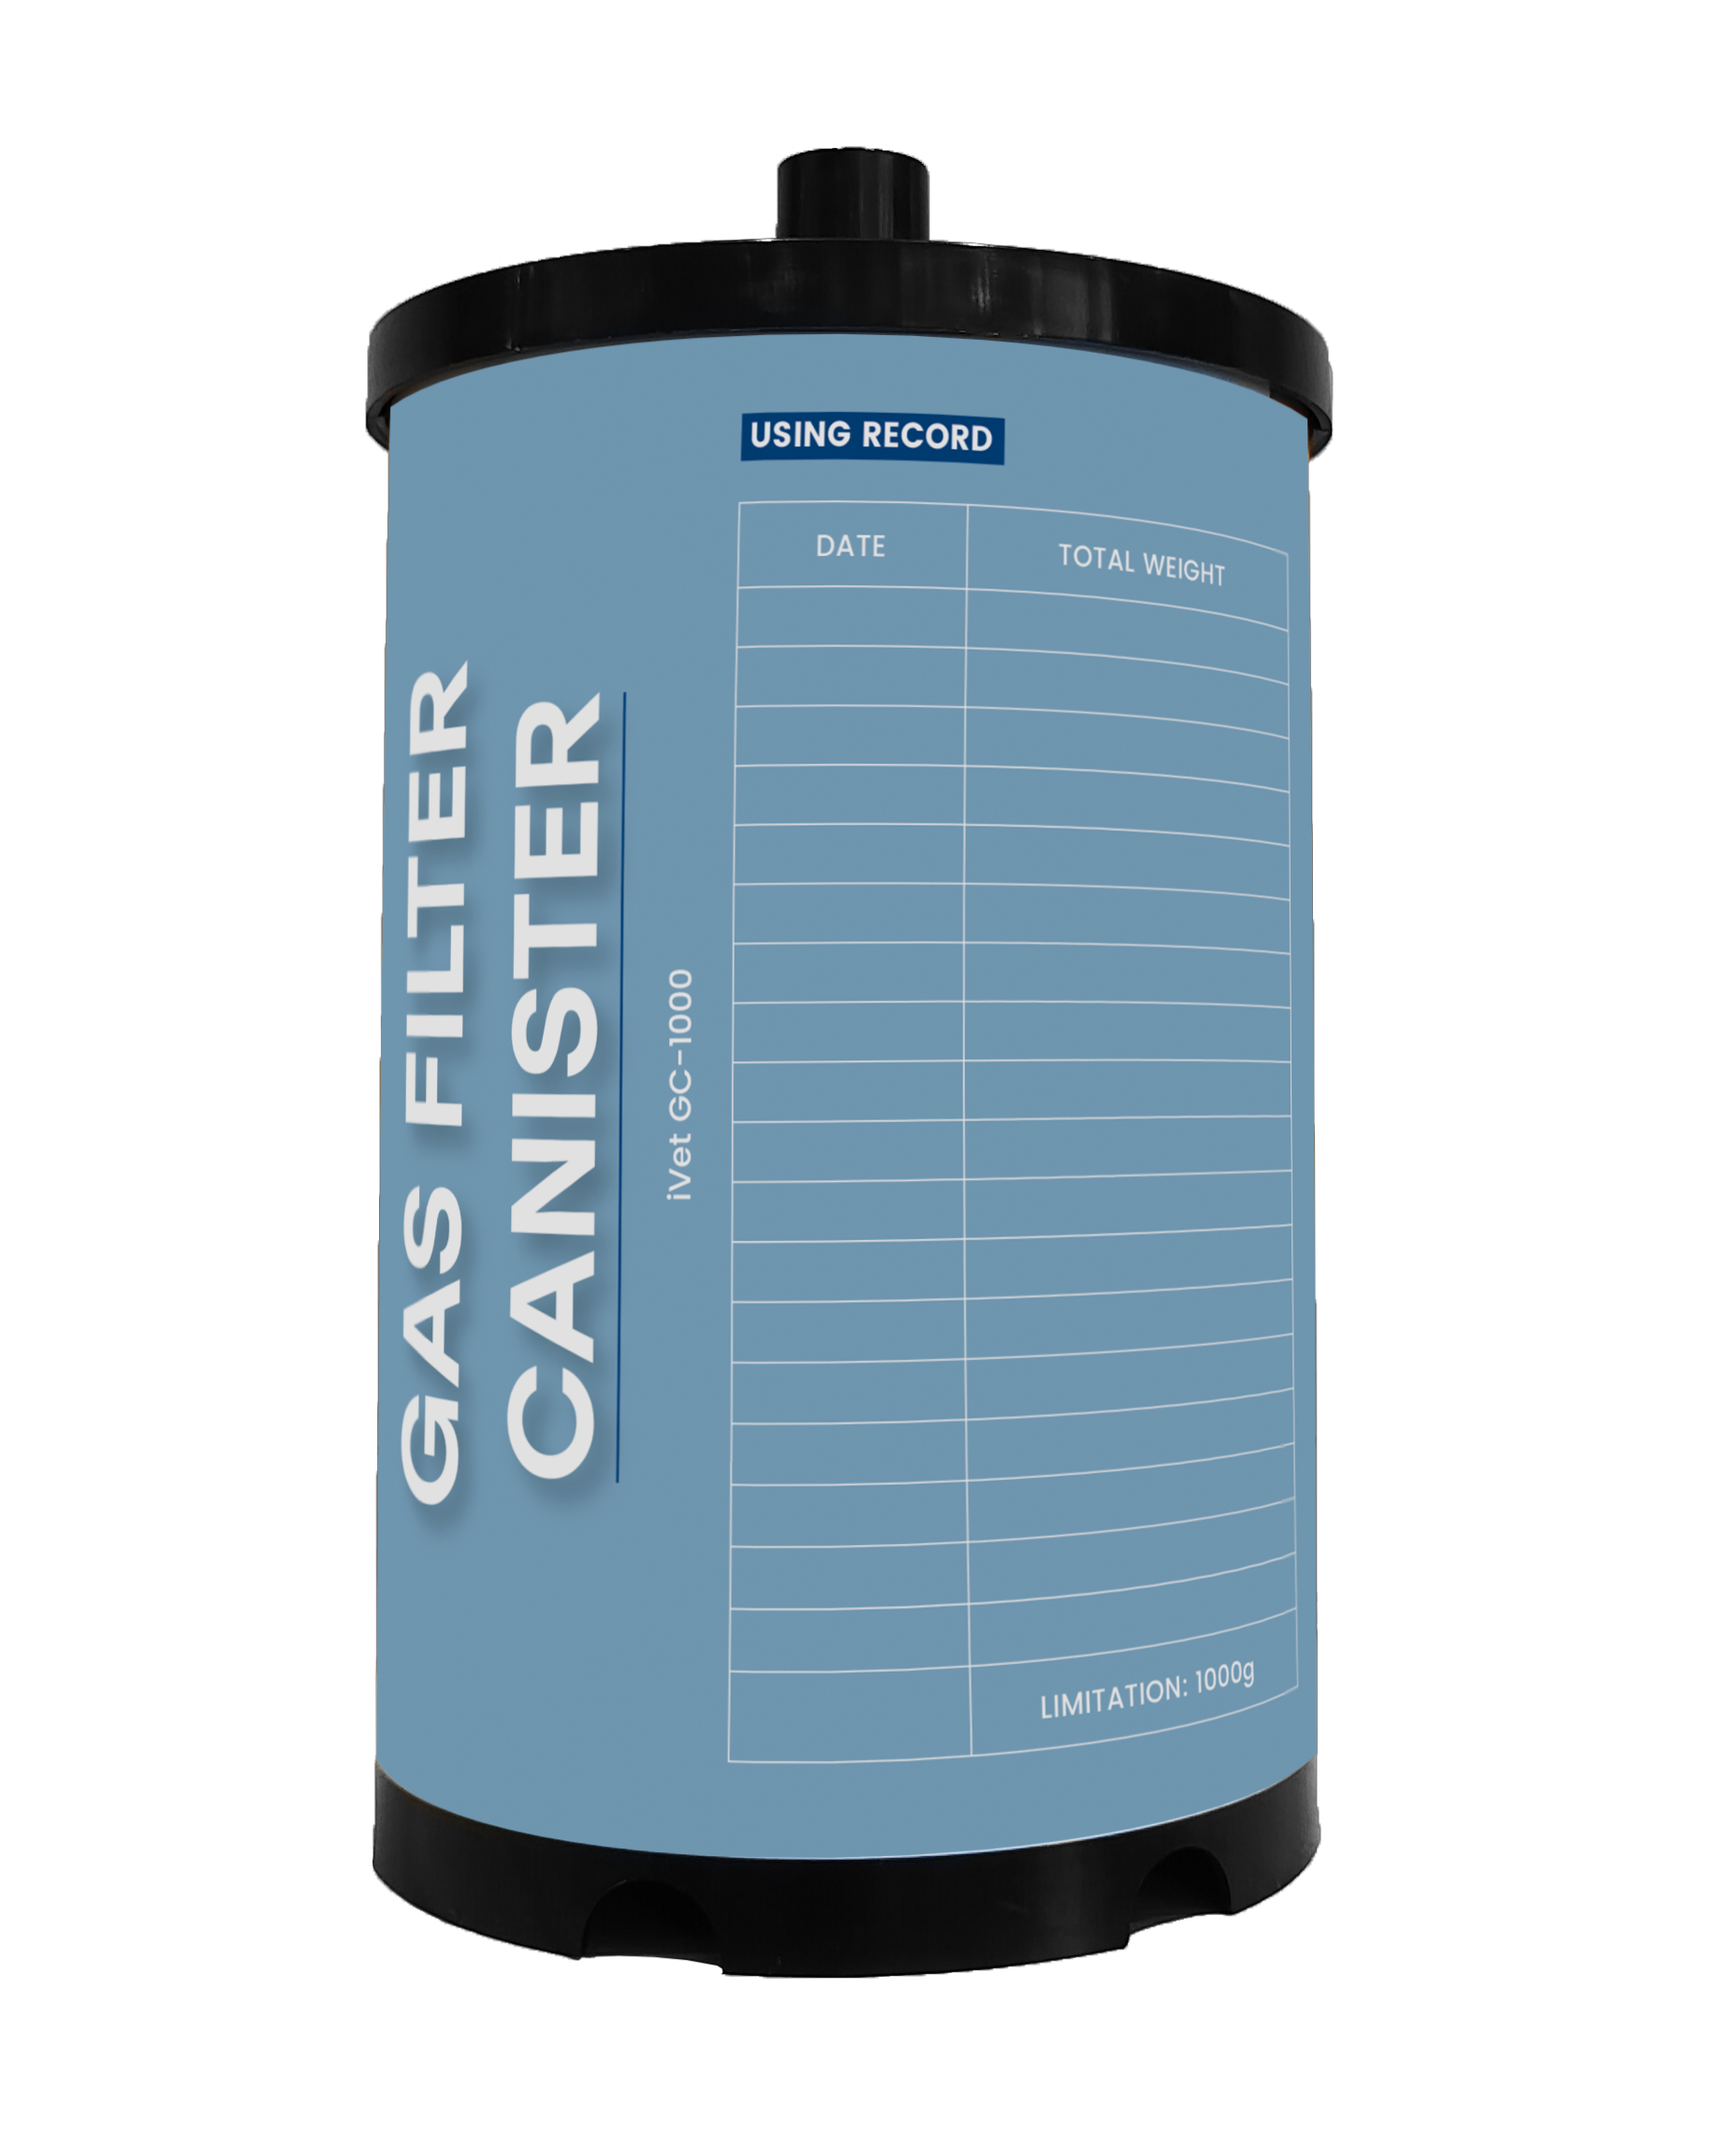 iVet Disposable Gas Filter Canister 1000g